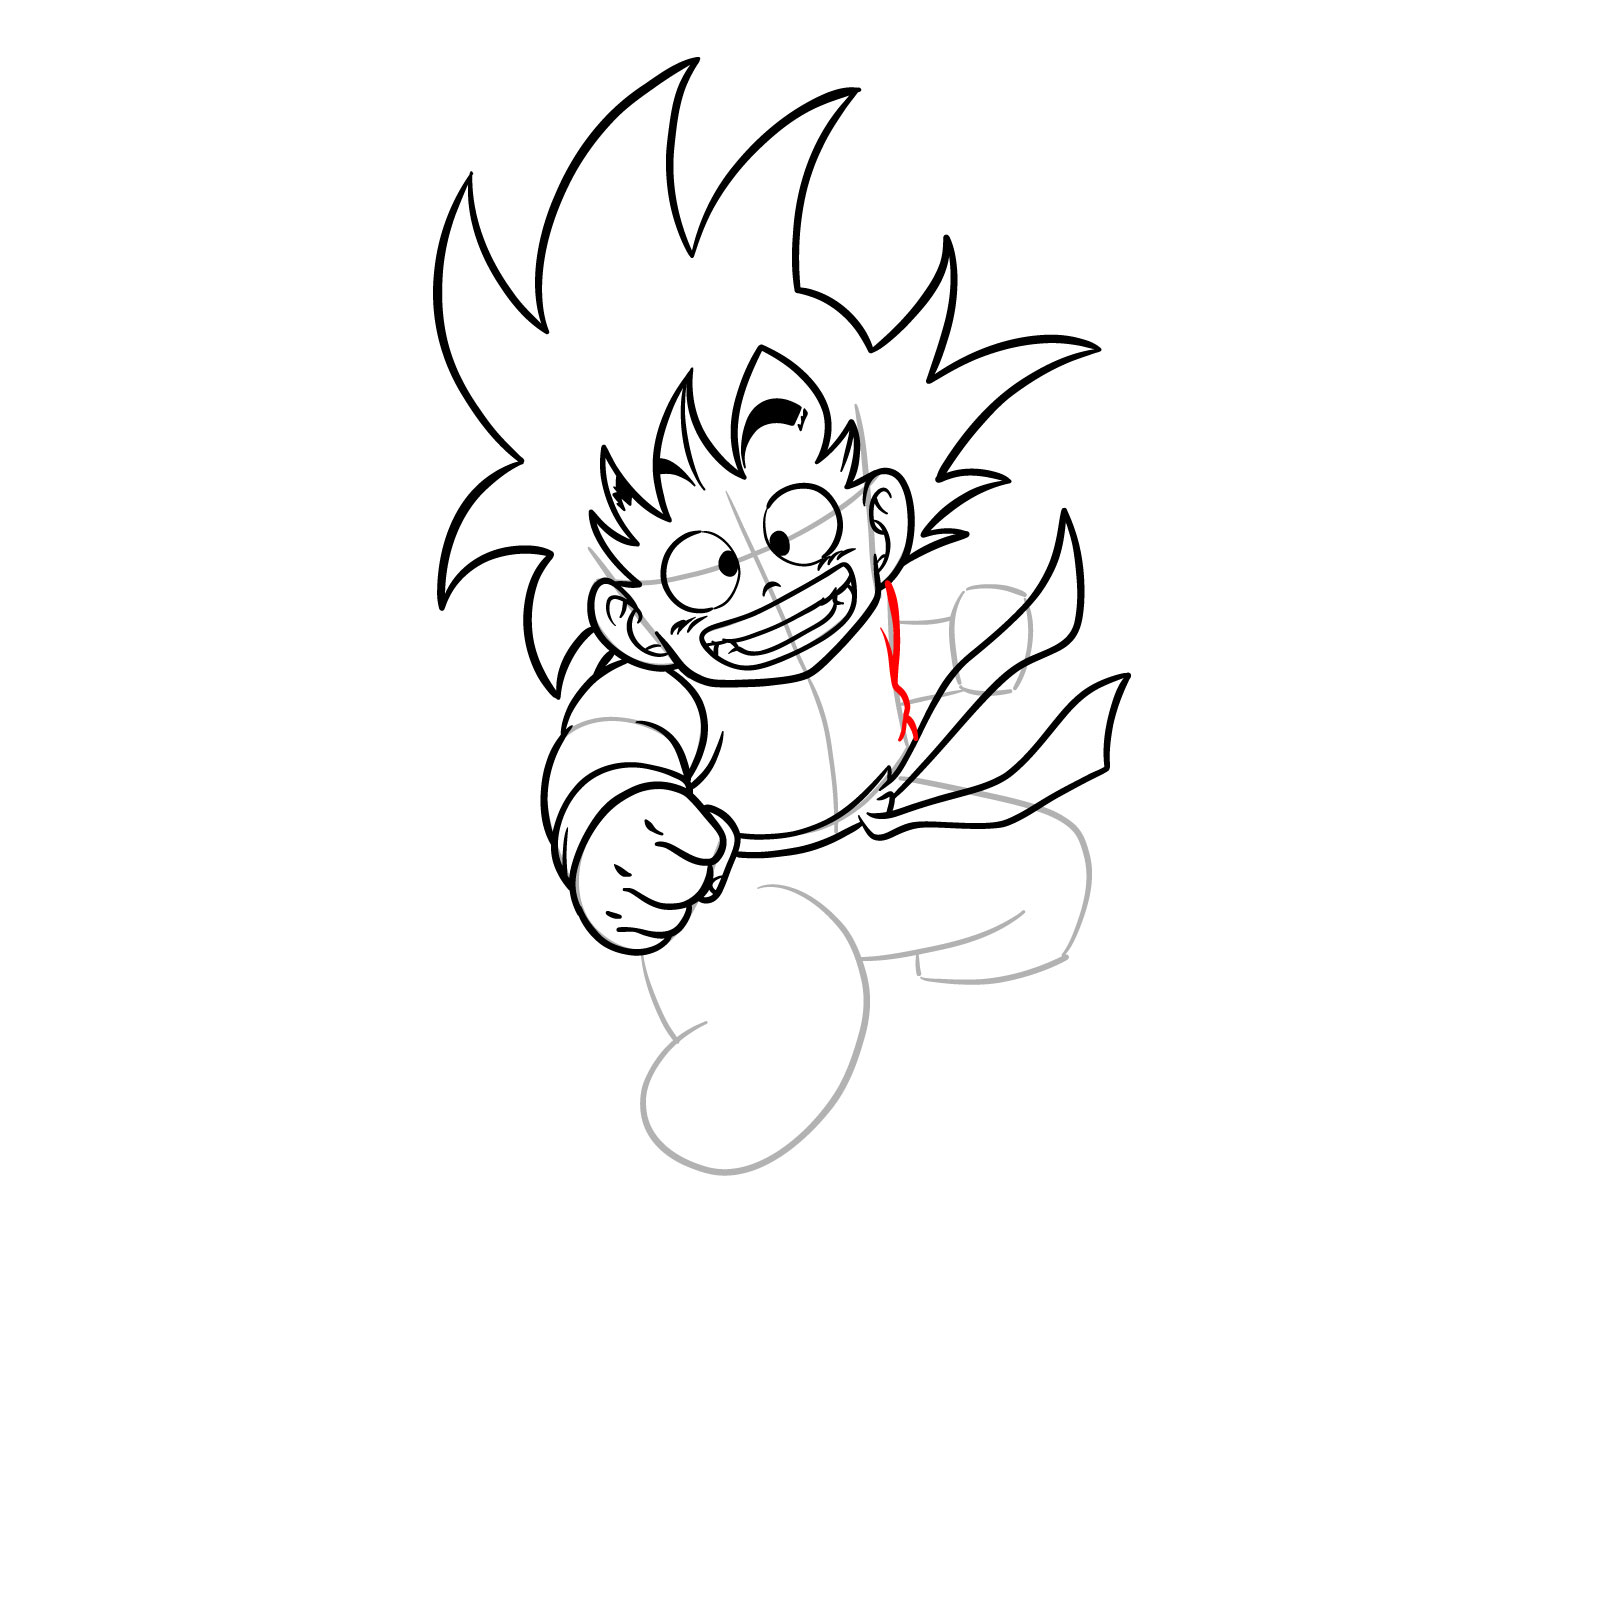 How to draw Kid Goku riding on the Flying Nimbus - step 15